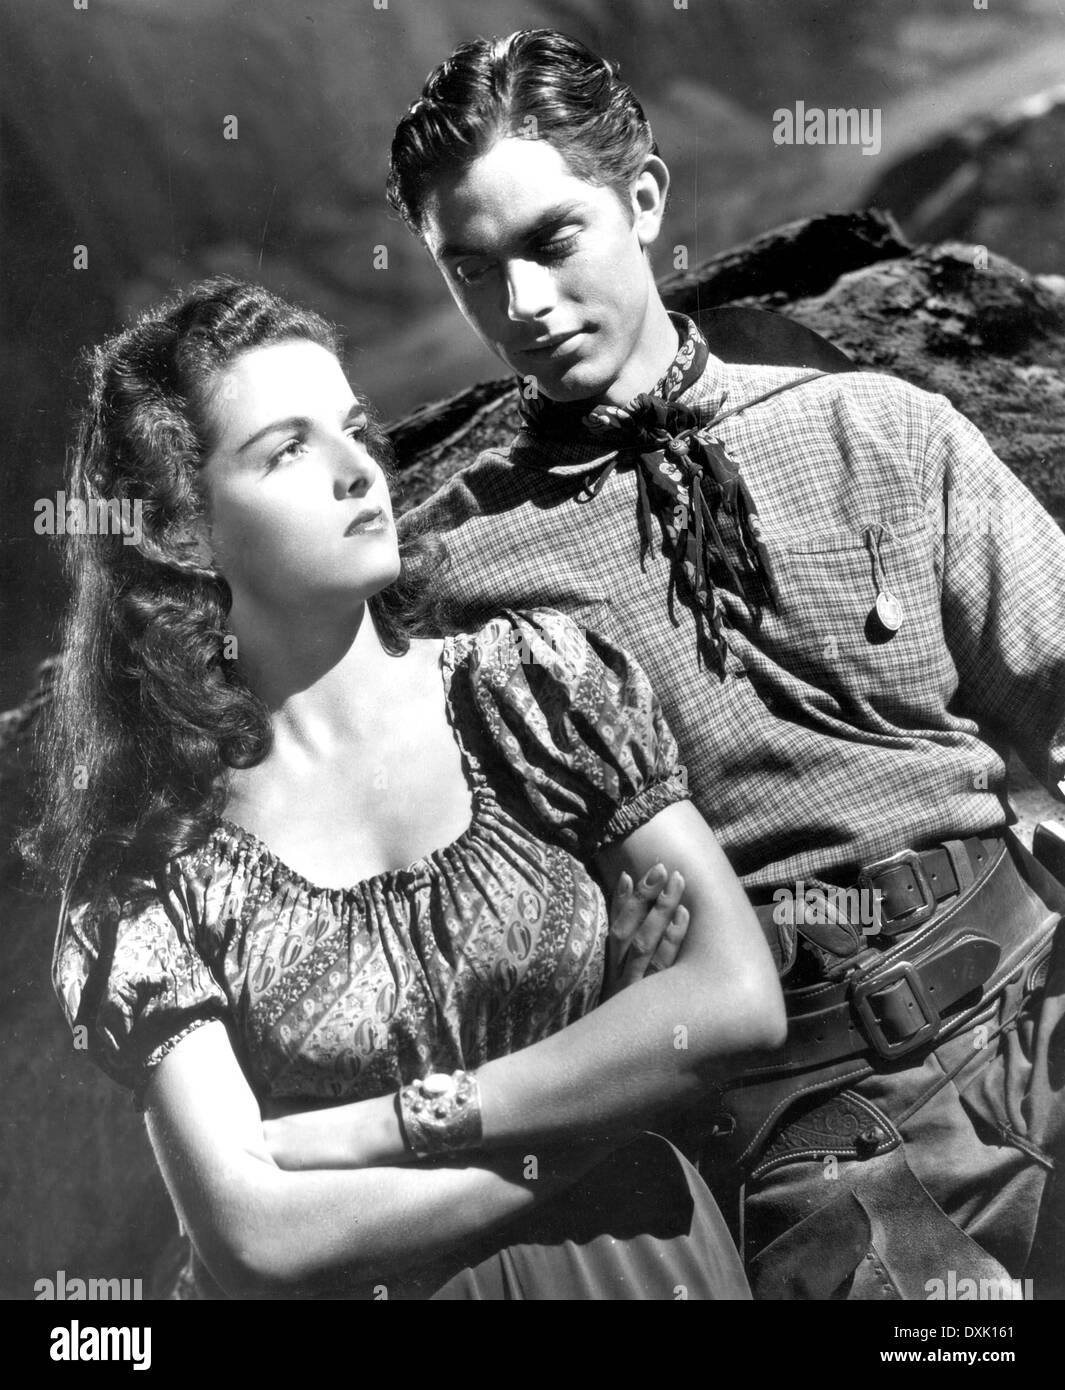 The outlaw 1943 Black and White Stock Photos & Images - Alamy